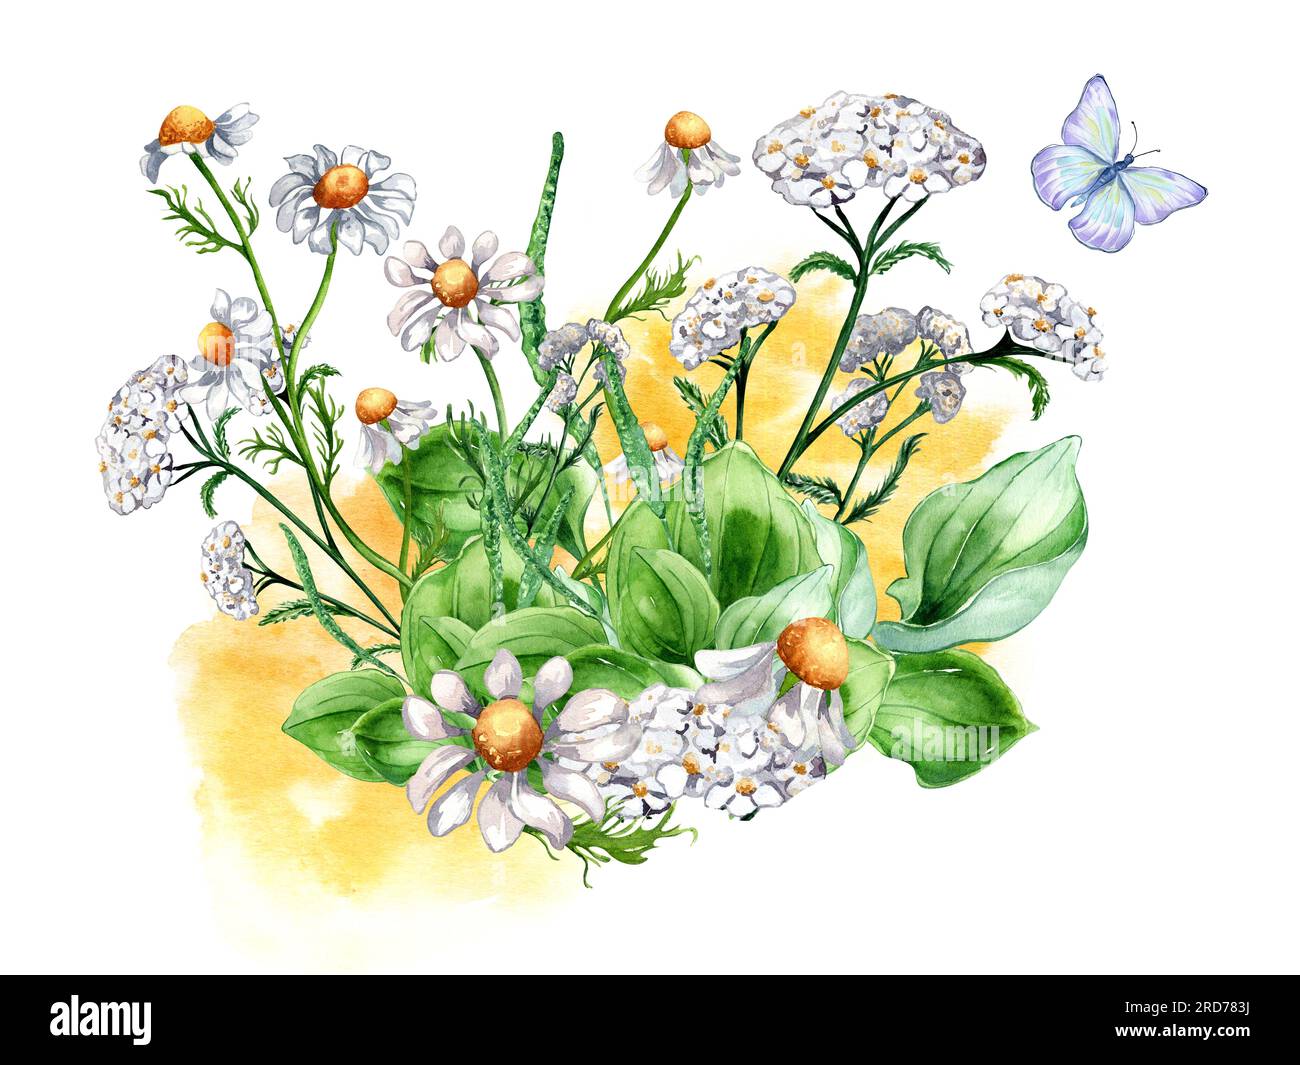 Bouquet of meadow medicinal flower, butterfly watercolor illustration isolated on white background. Daisy, camomile, plantain, achillea millefolium ha Stock Photo